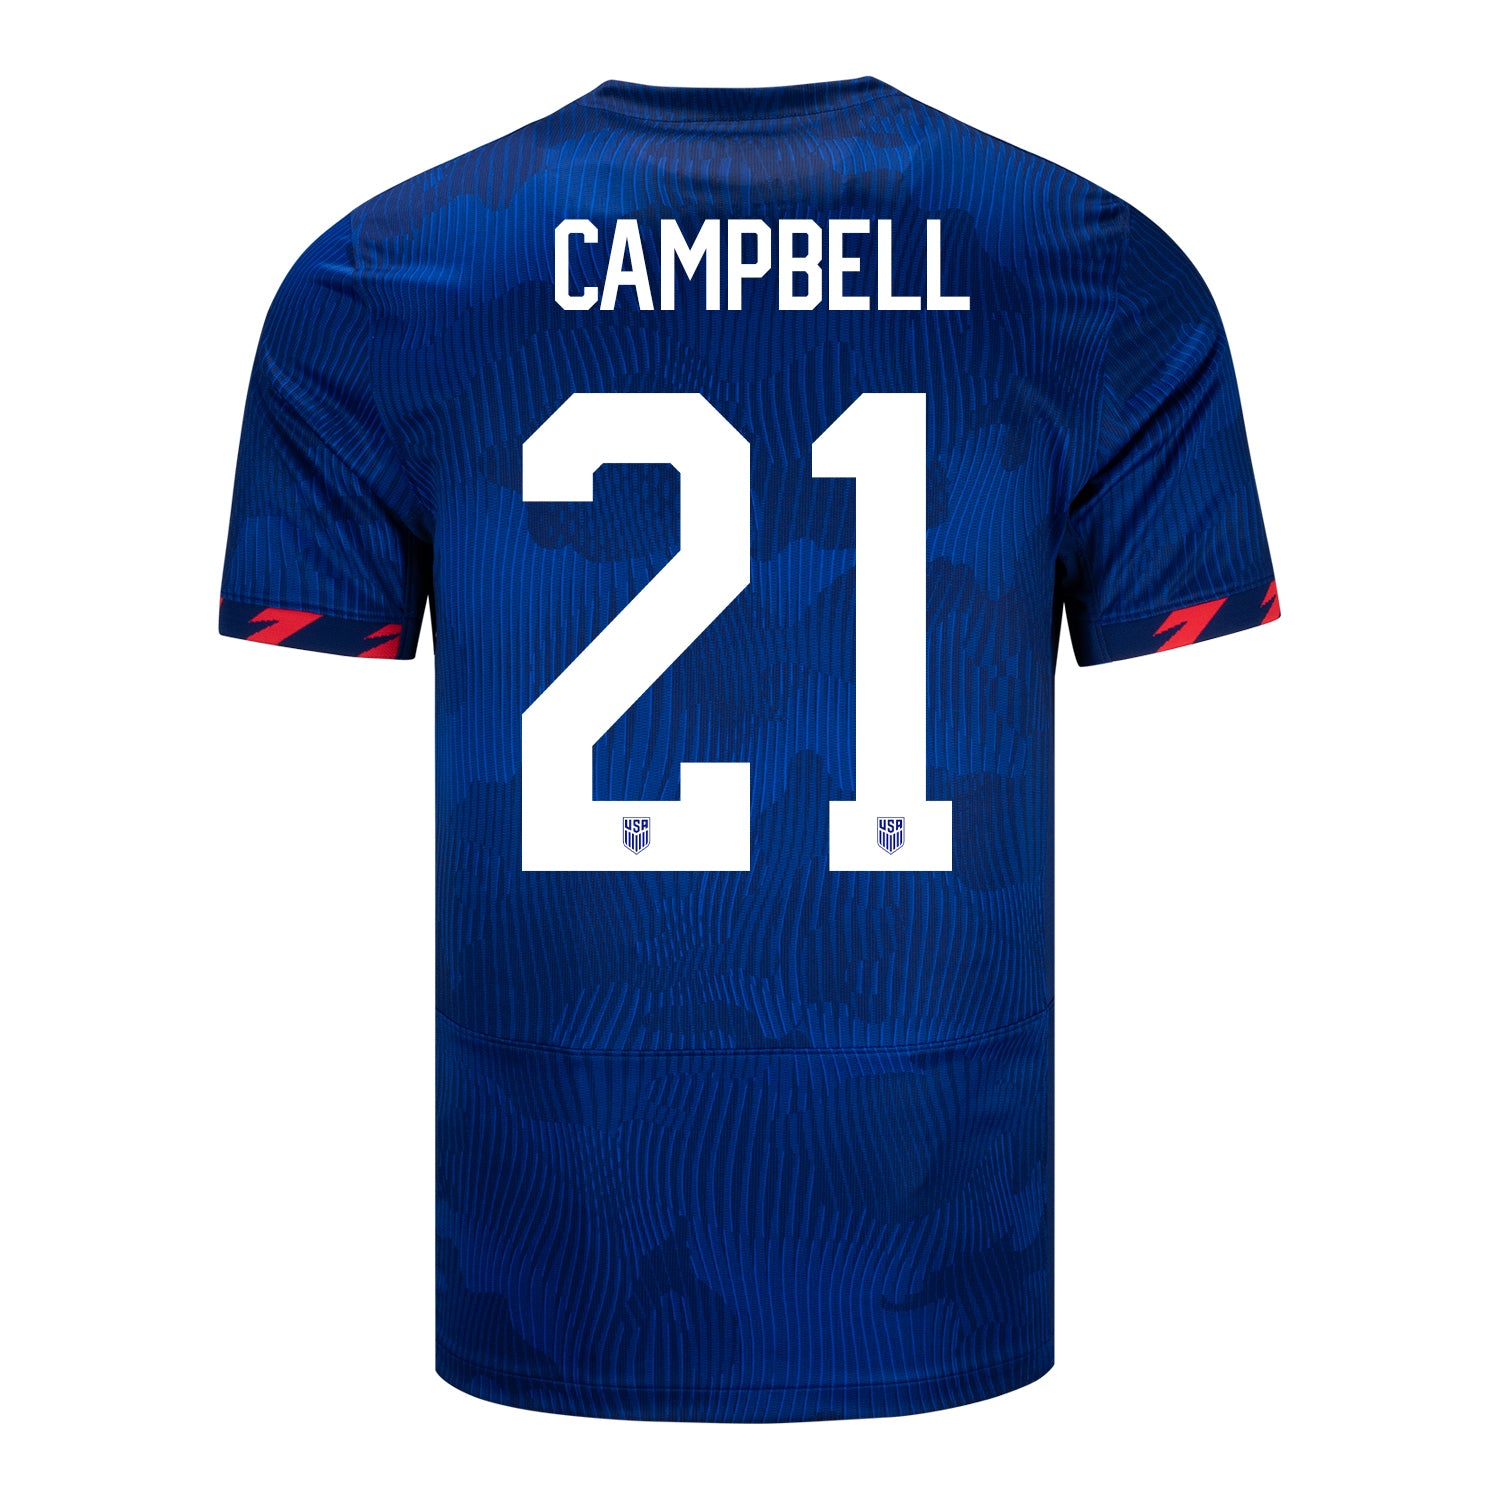 Men's Personalized Nike USWNT Away Stadium Jersey in Blue - Back View